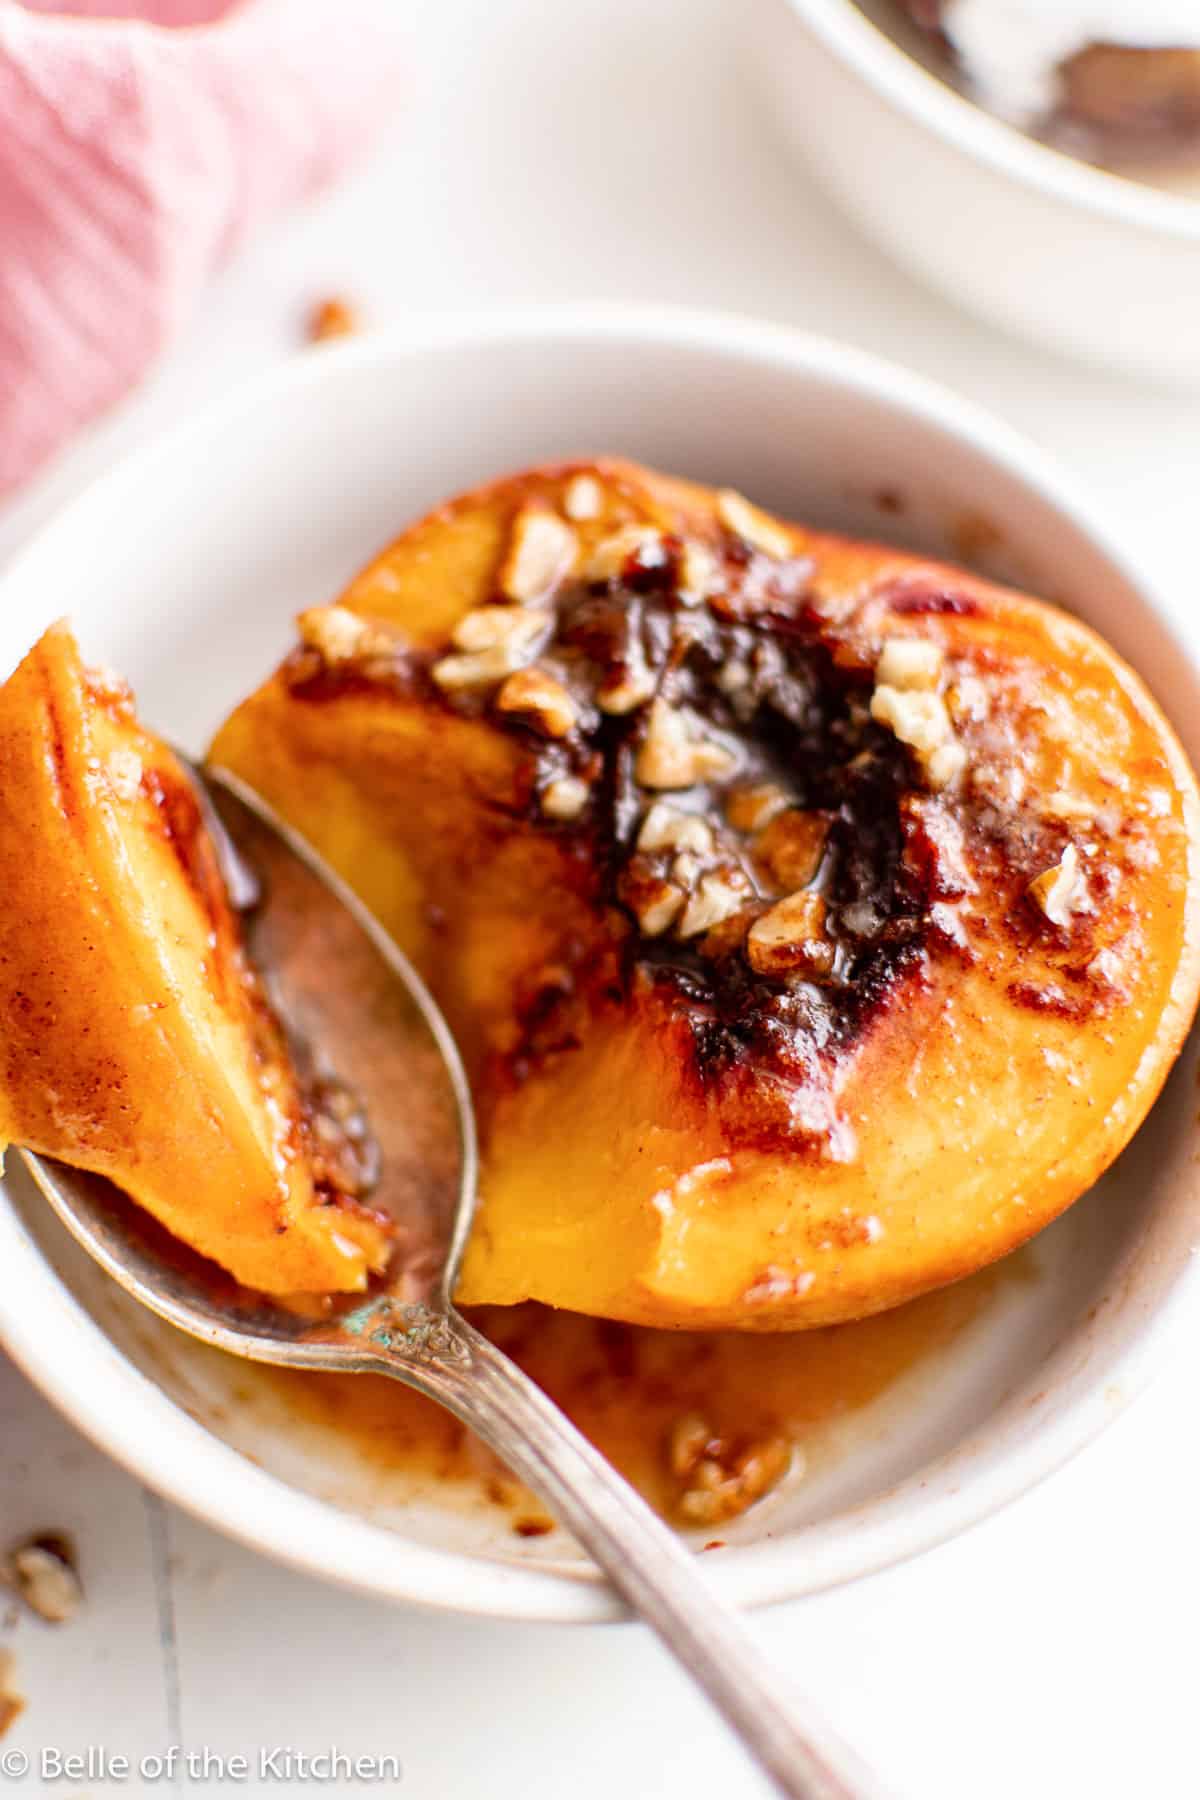 a roasted peach in a white bowl being scooped out with a spoon.